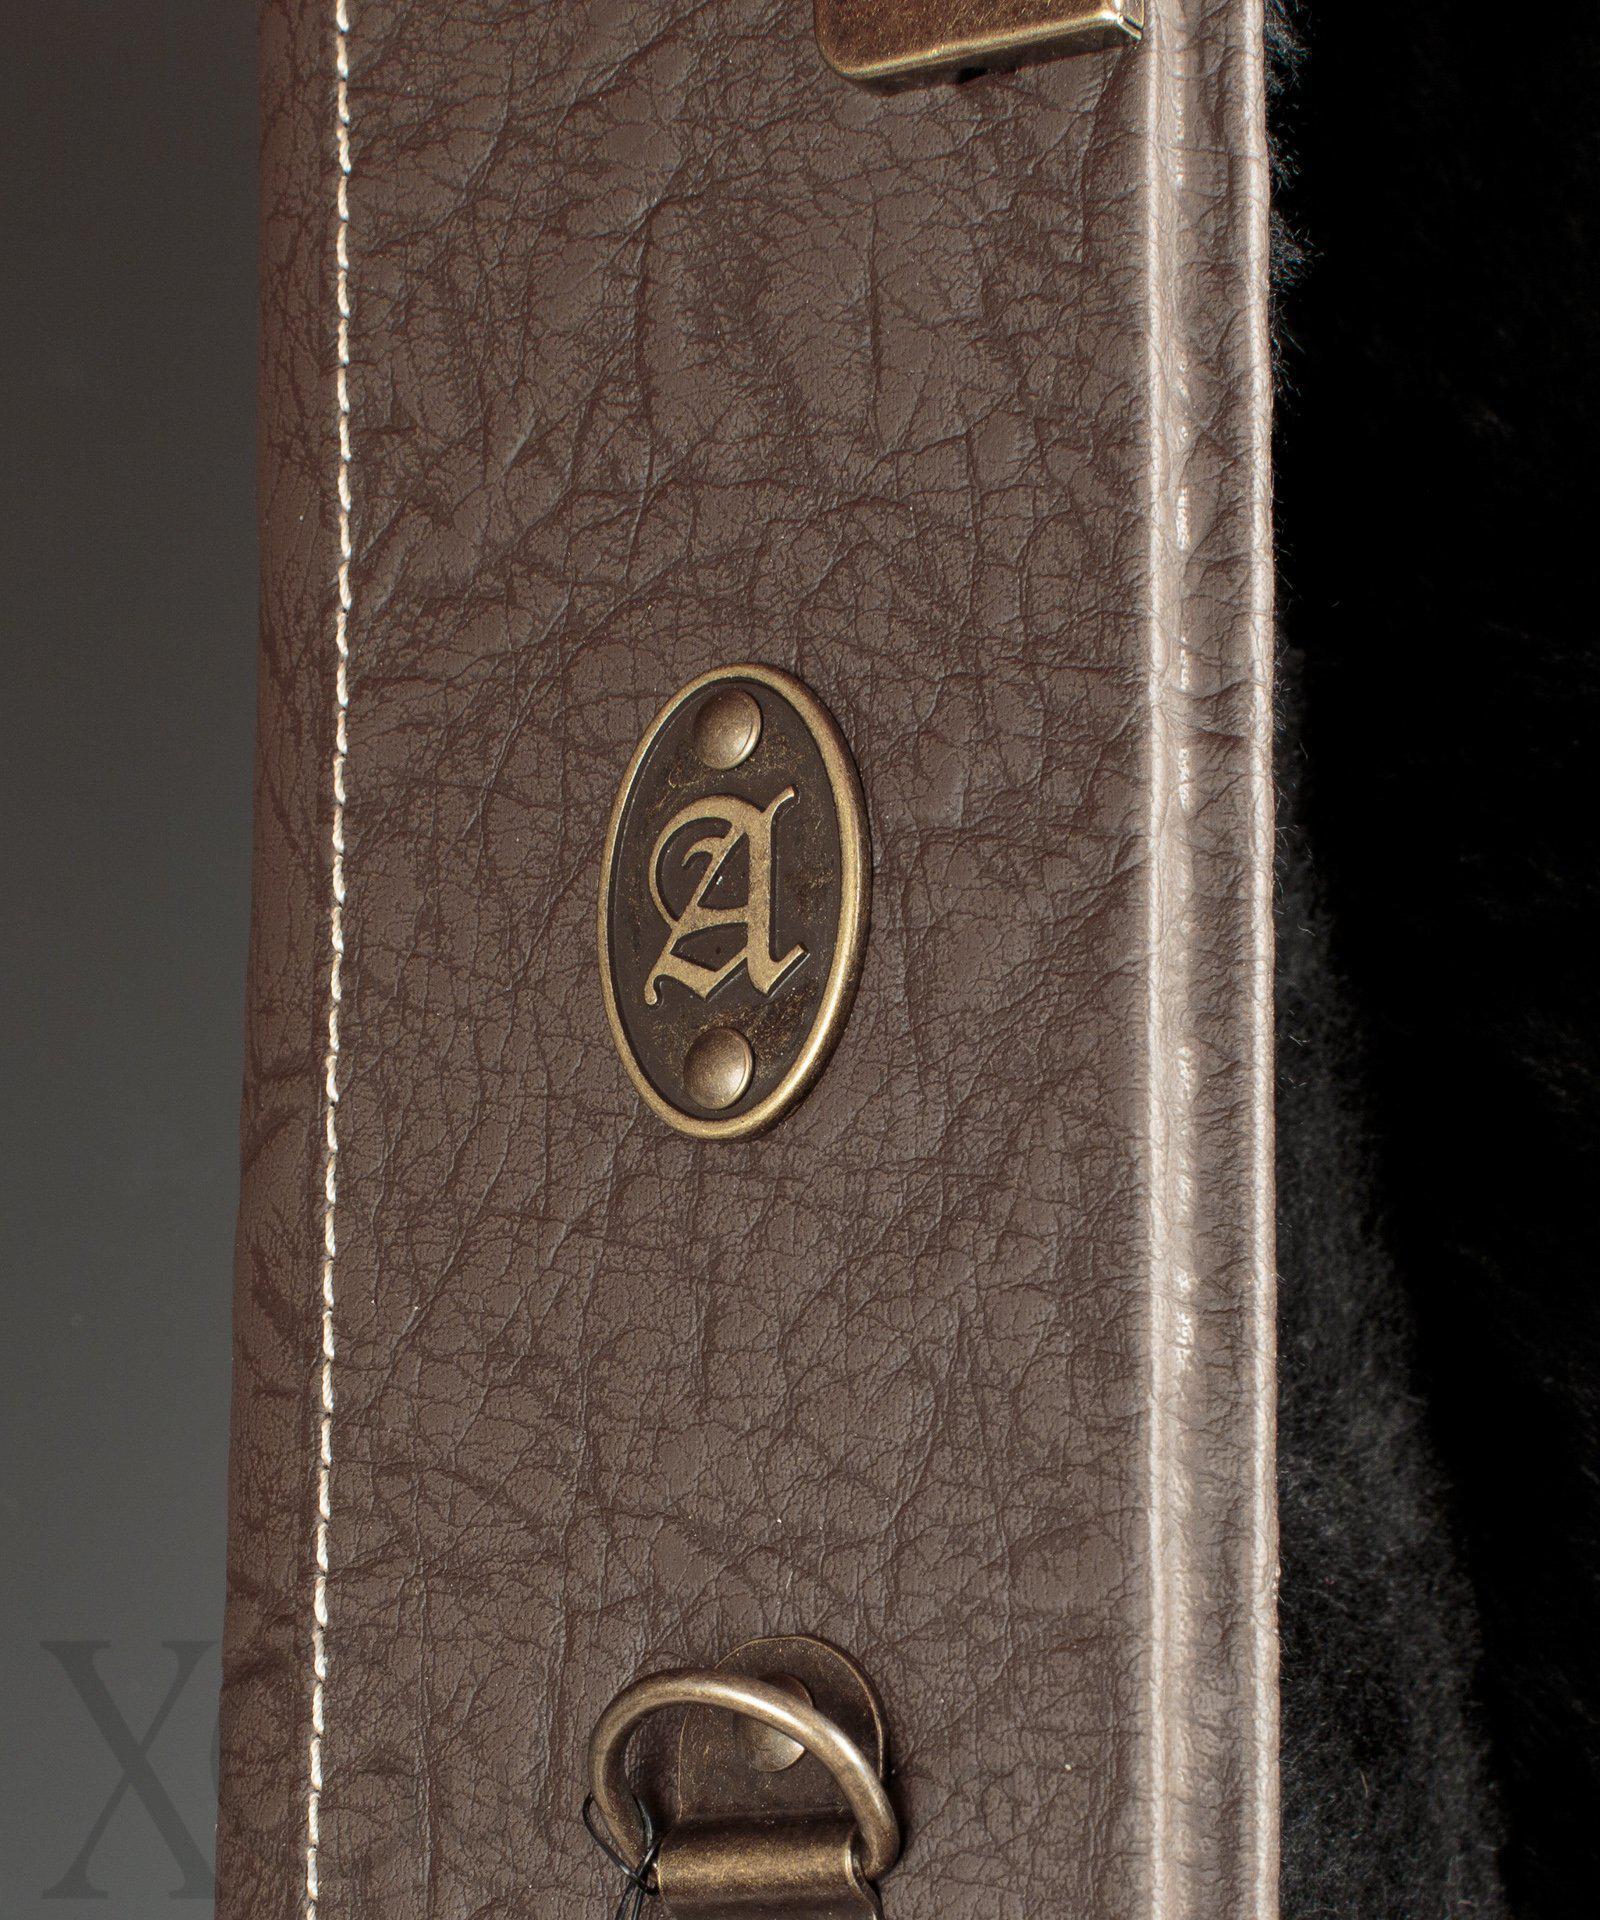 VGV Hardshell Case: Brown with Hygrometer (classy!)